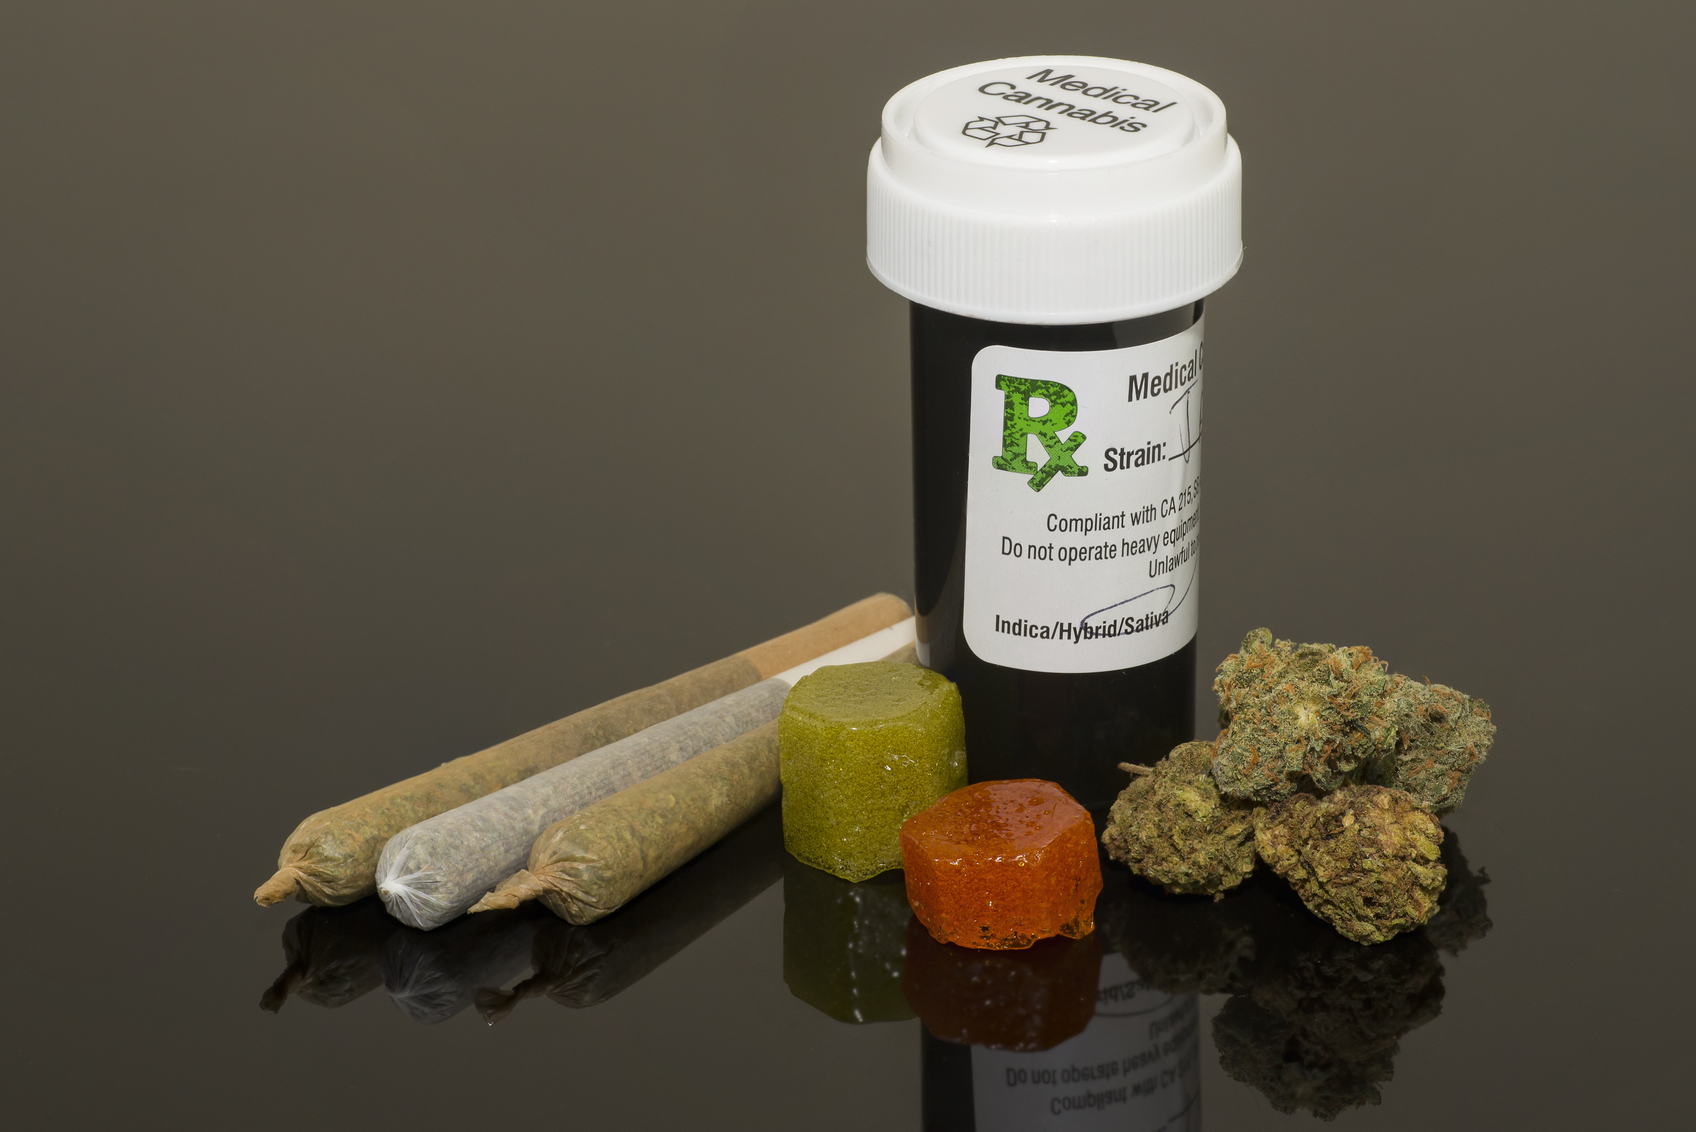 Weeding out the truth: Cannabis-based medications for cancer patients